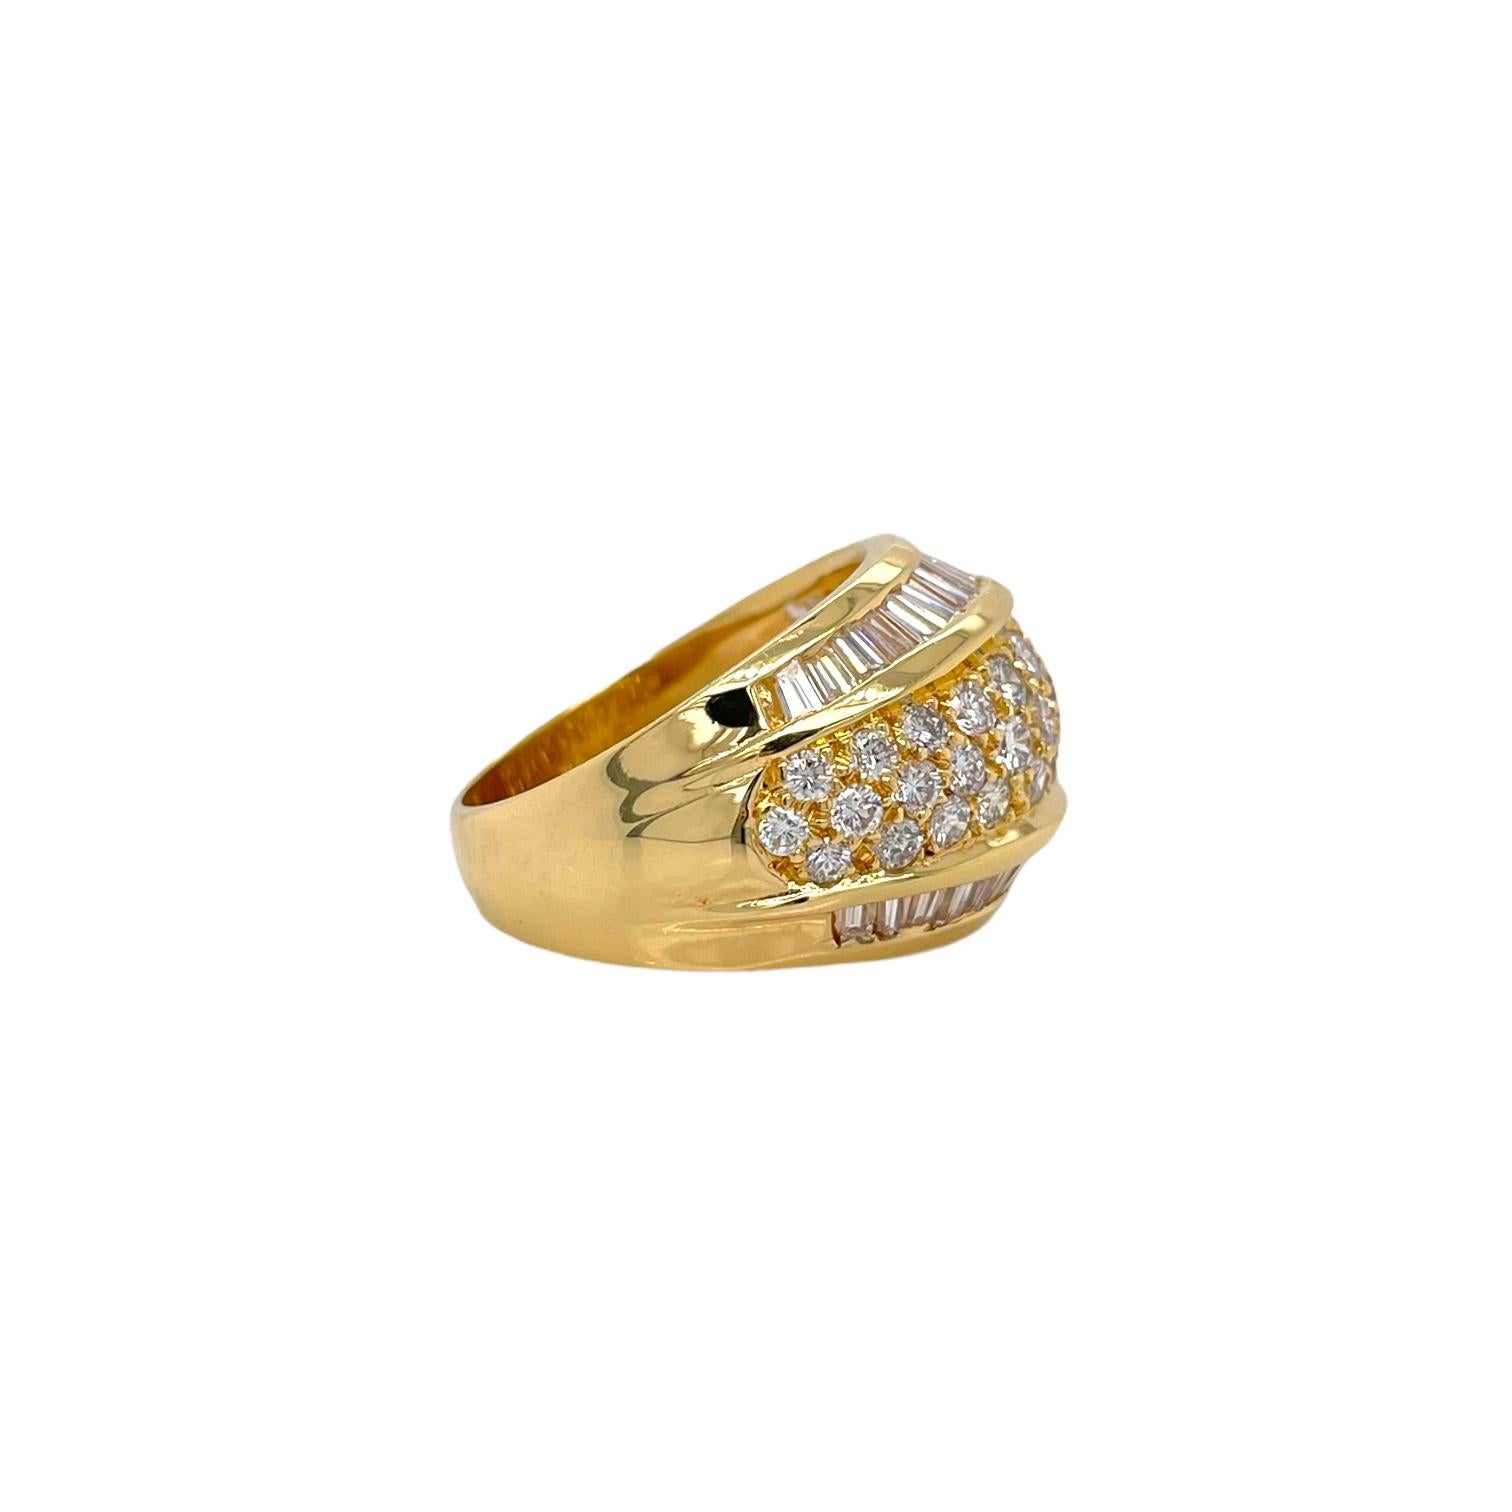 Beautiful 14mm wide domed baguette and round diamond cocktail ring. Ring contains baguette diamonds within a channel setting, 1.38tcw and round brilliant diamonds within prong settings, 1.30tcw. All diamonds are G in color and SI1 in clarity,